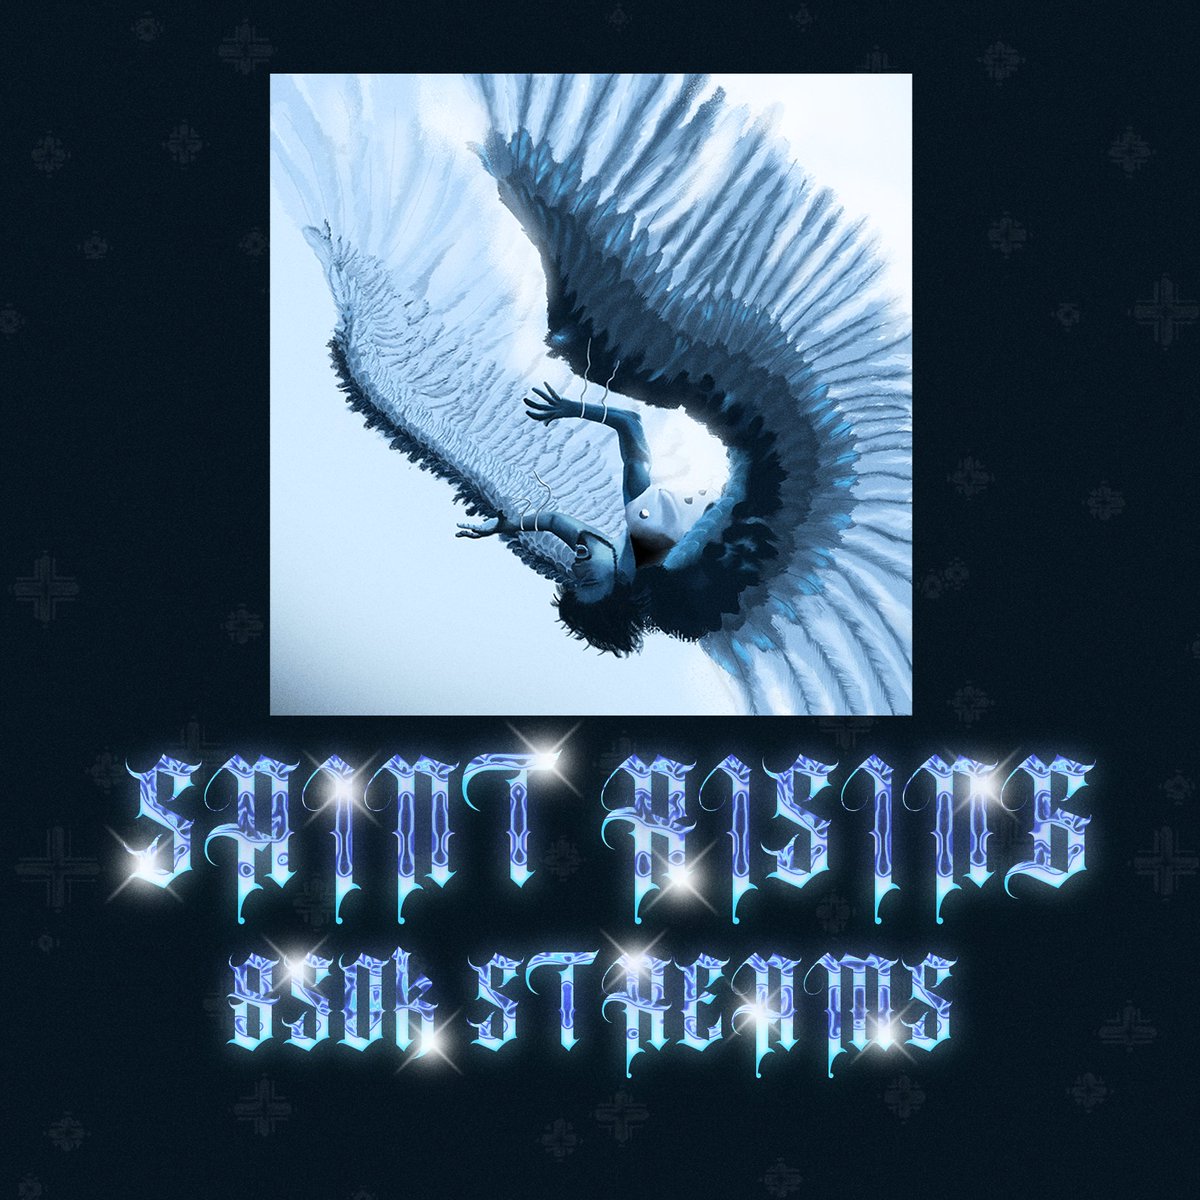 ✞ SAINT RISING has officially hit 850K streams in total on Spotify!!!

#SaintNoelle #Spotify #MusicUpdates